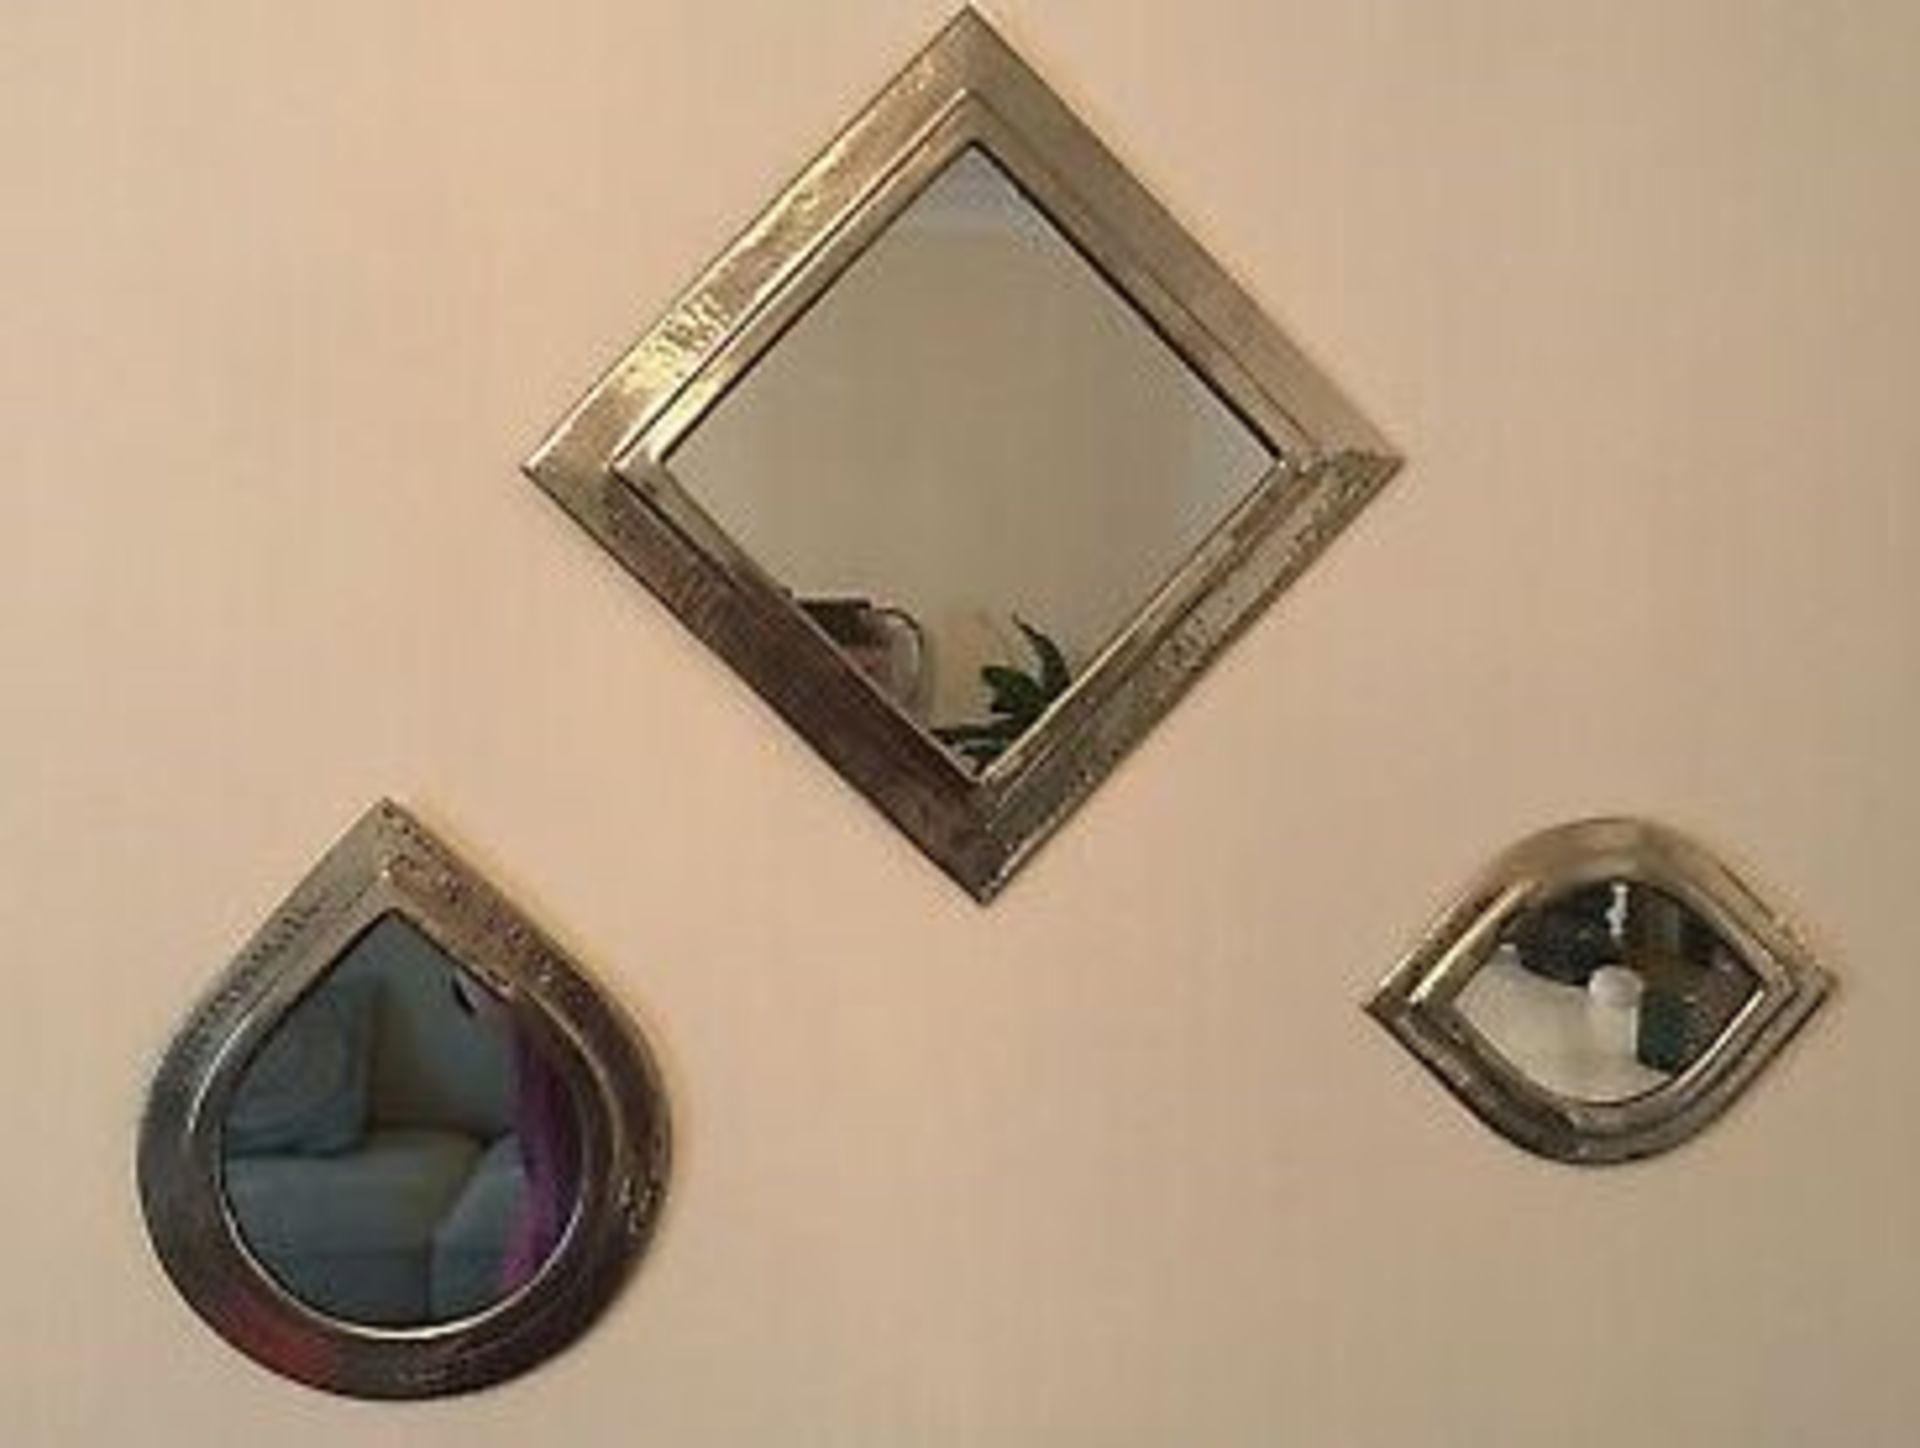 1 X LA REDOUTE SET OF 3 AFIRA HAMMERED METAL MOROCCAN MIRRORS / RRP £65.00 / GRADE A